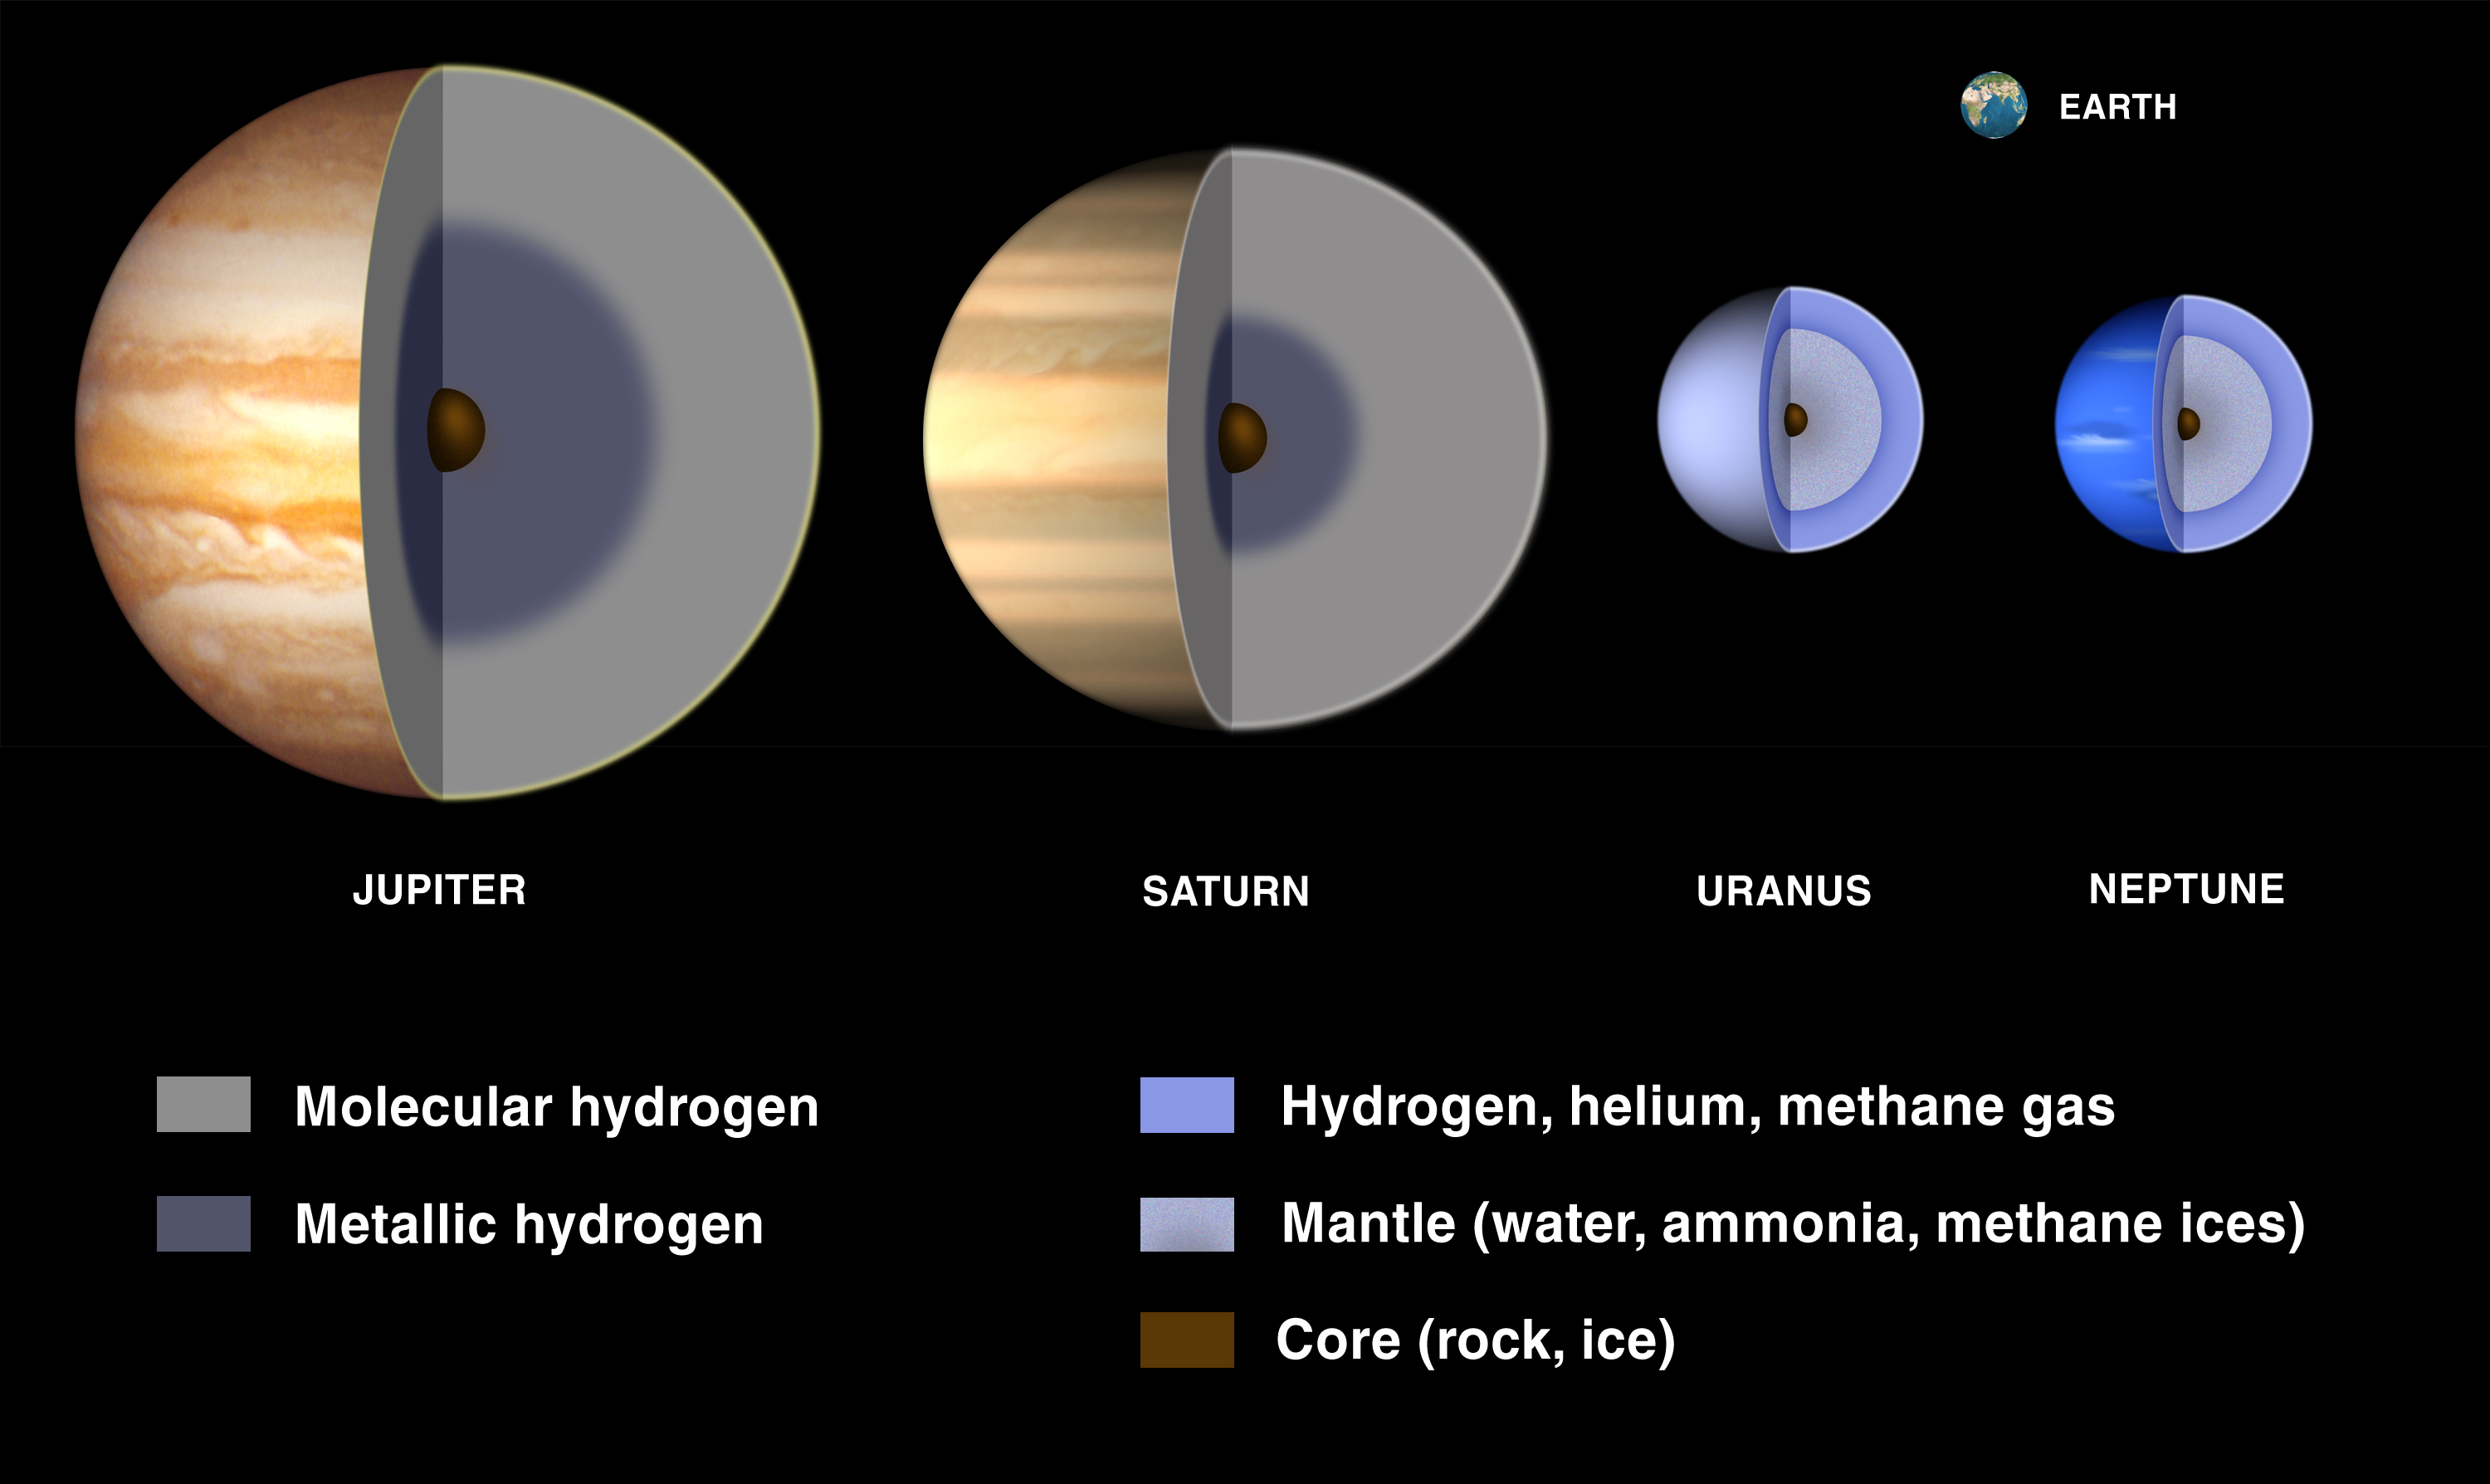 Jupiter and Saturn shown lwith mostly gaseous interiors, Uranus and Neptune are mostly icy oceans